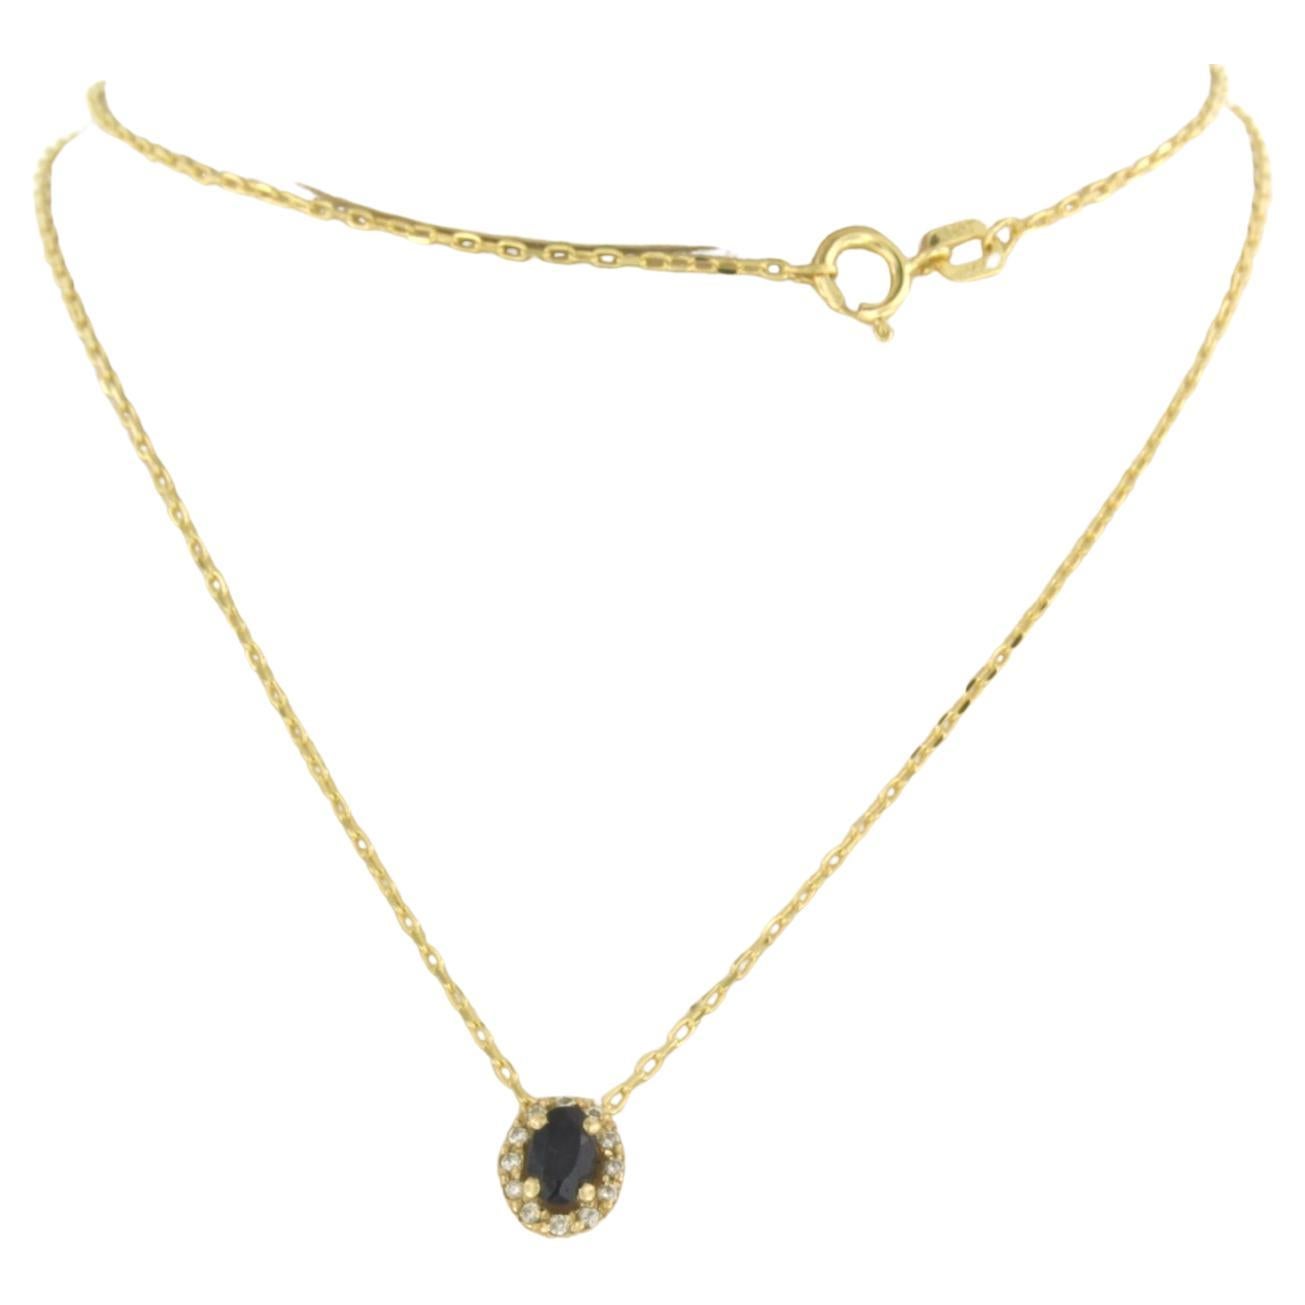 14k yellow gold necklace with pendant set with sapphire 0.20 carat and brilliant cut diamond 0.05ct - F/G - VS/SI - 45cm

Detailed description

the length of the necklace is 45 cm long by 0.7 mm wide

Dimensions of the pendant are 8 mm high by 6 mm